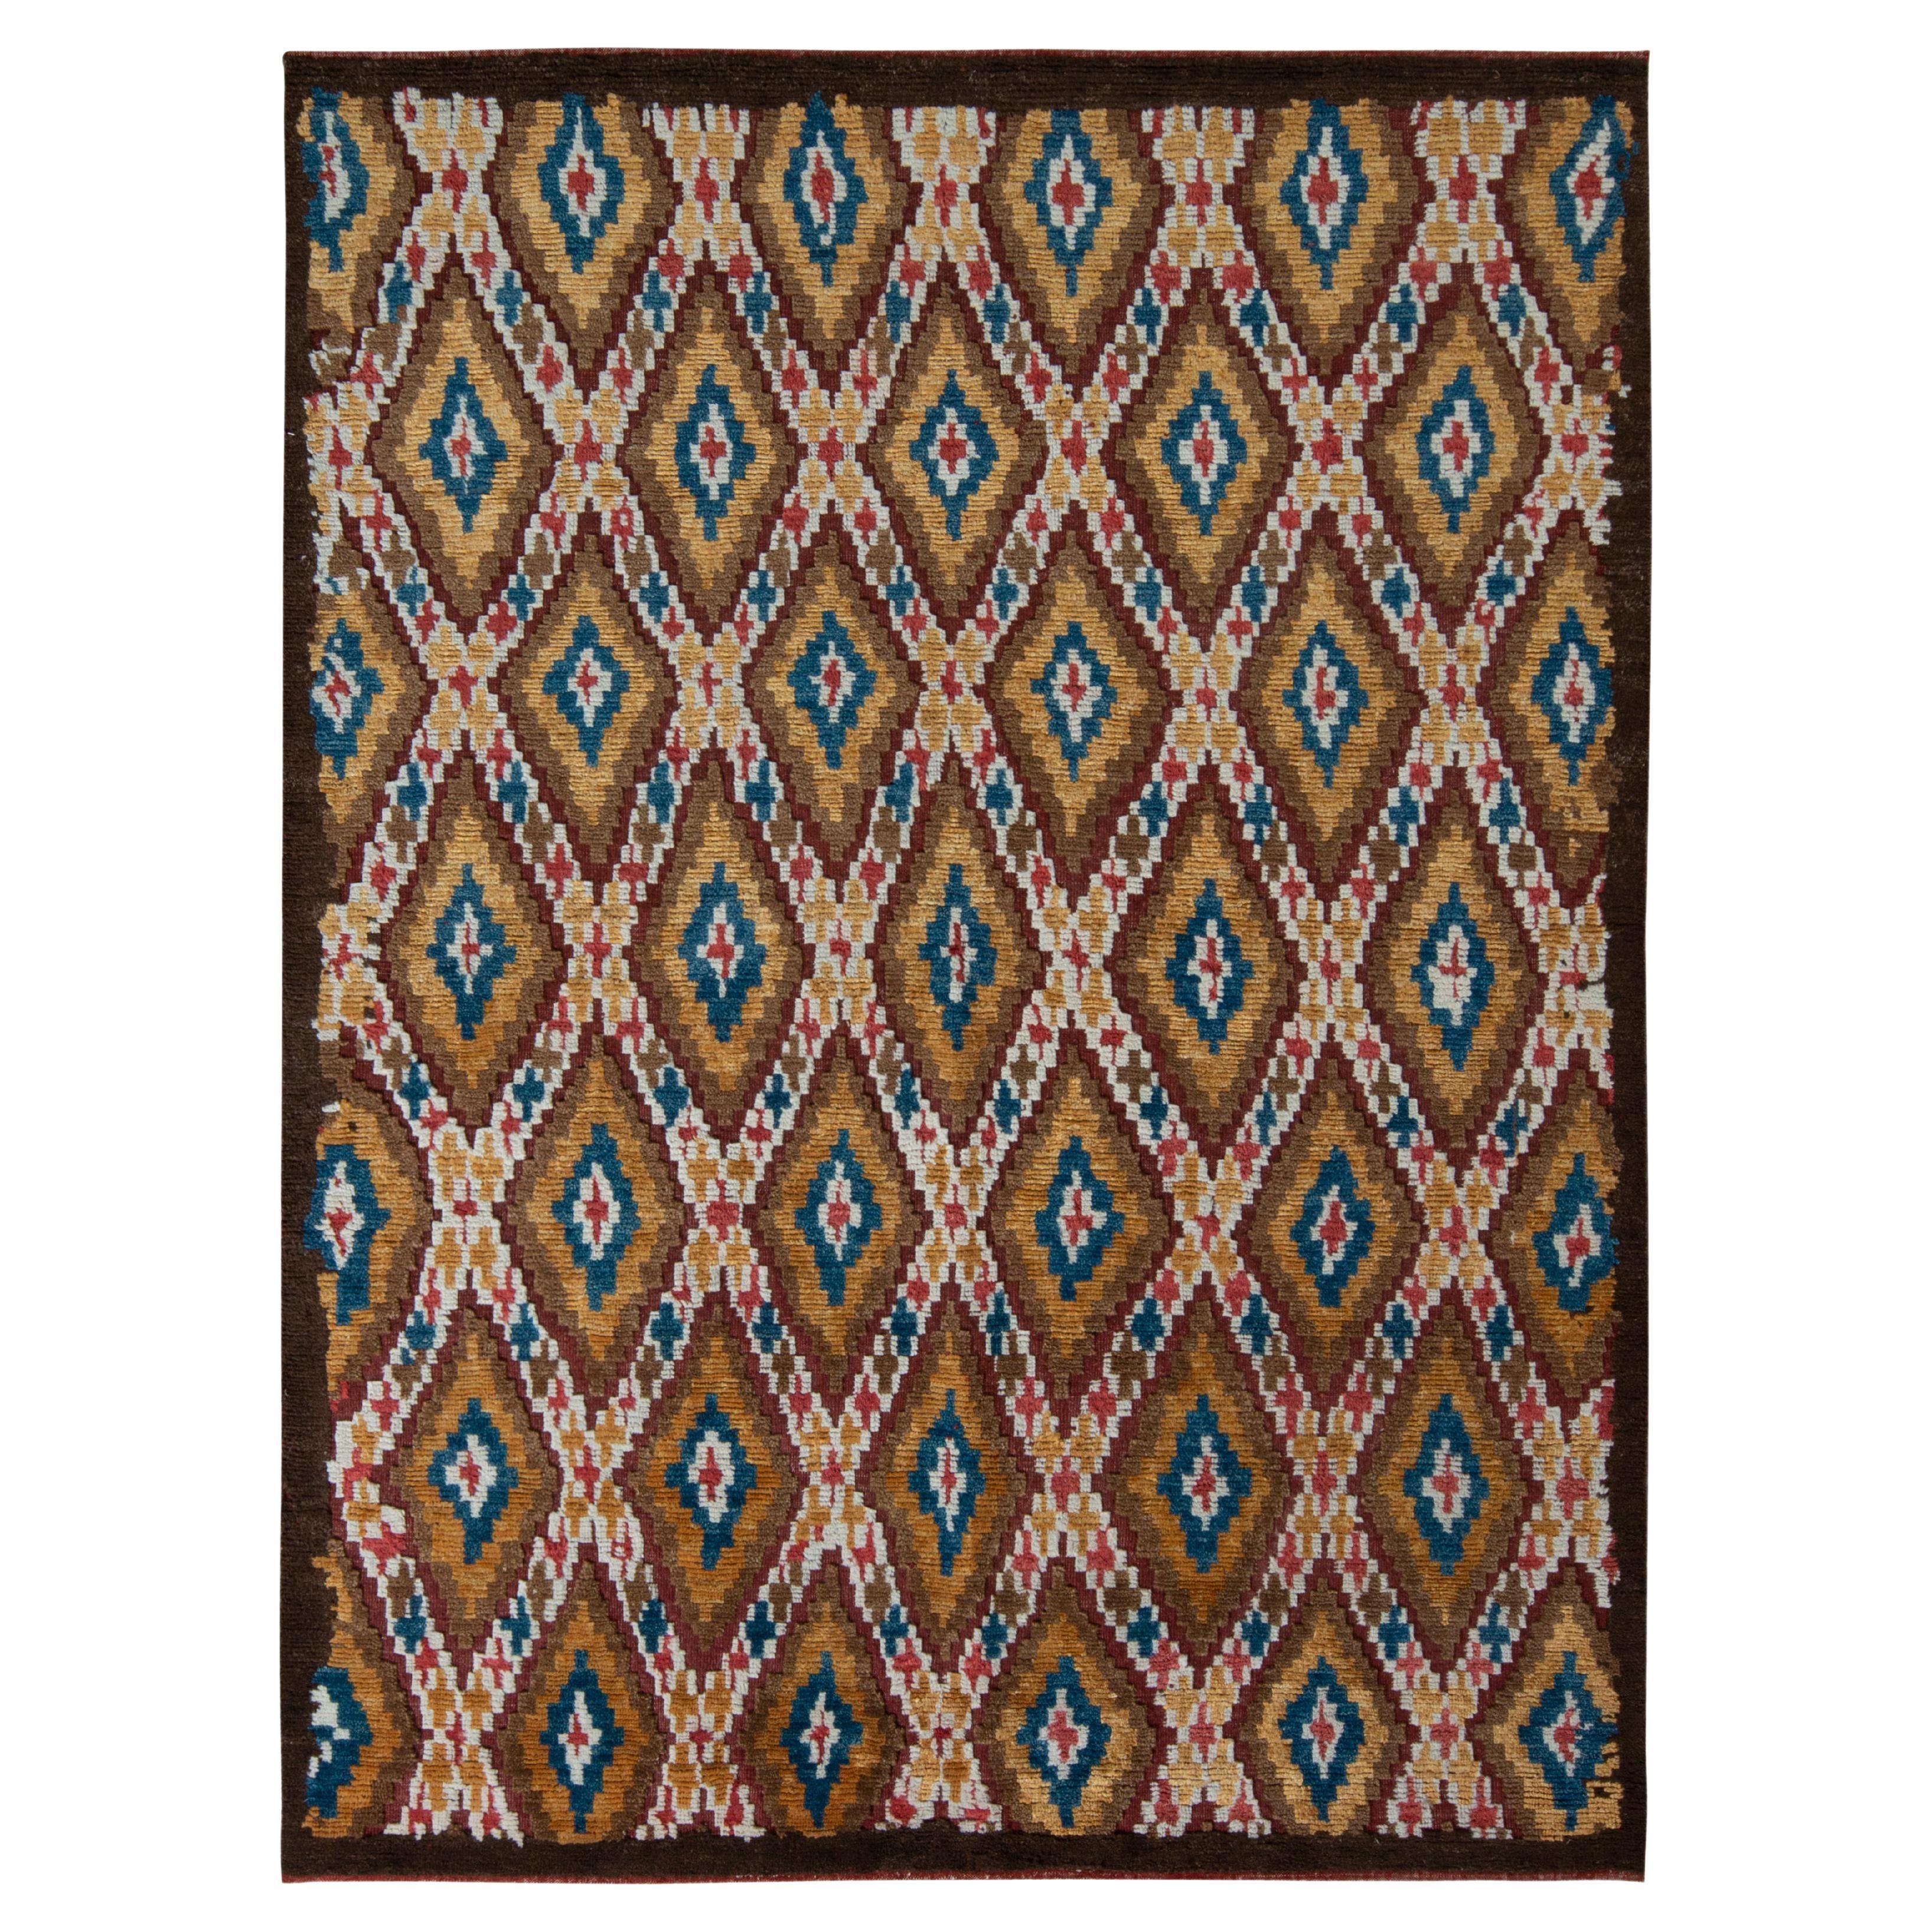 Rug & Kilim’s Moroccan Style Rug in Beige-Brown All over Diamond Pattern